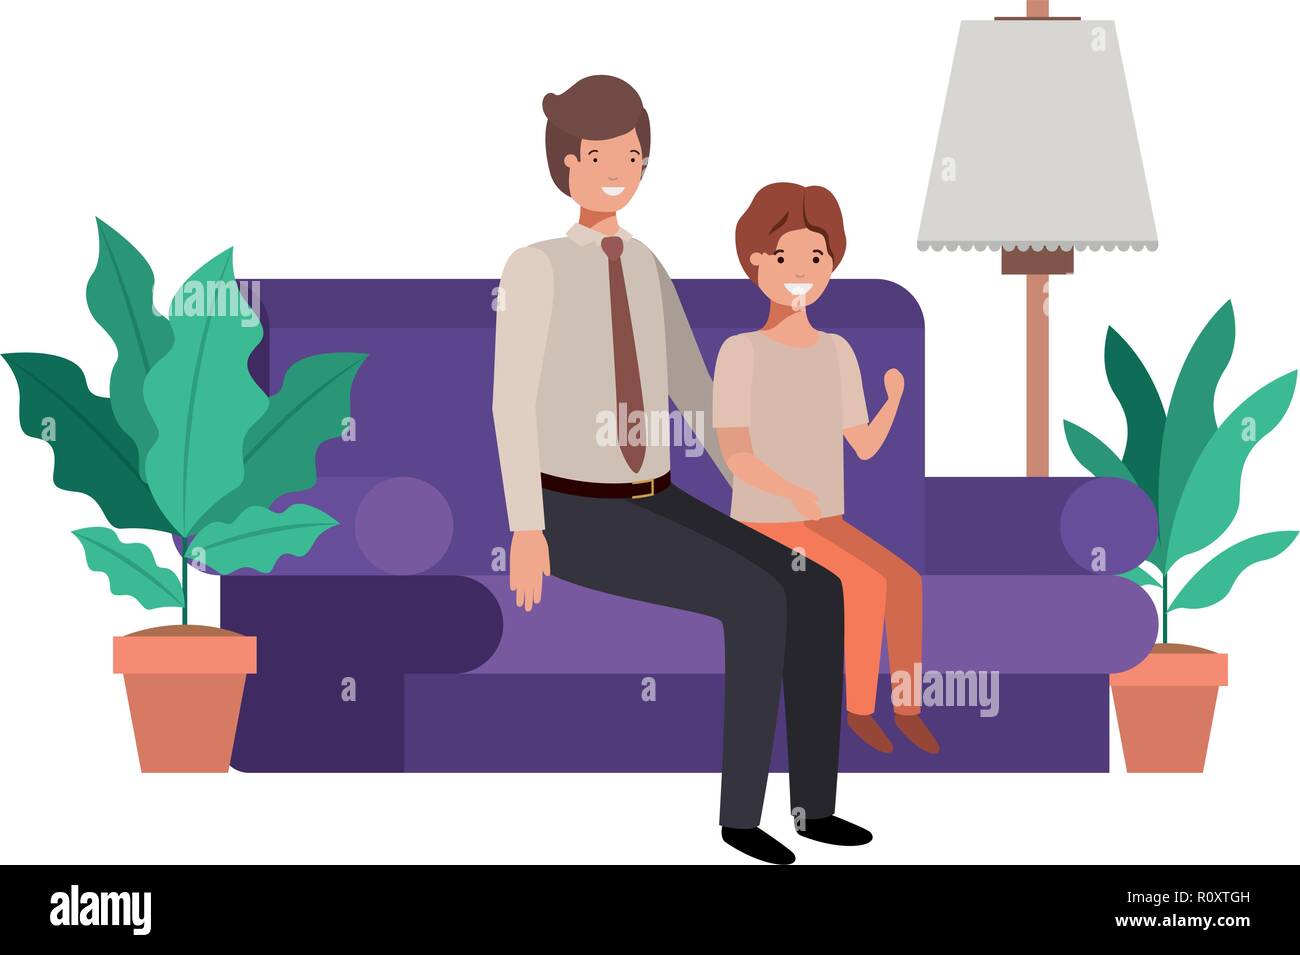 father and son sitting in couch avatar character Stock Vector